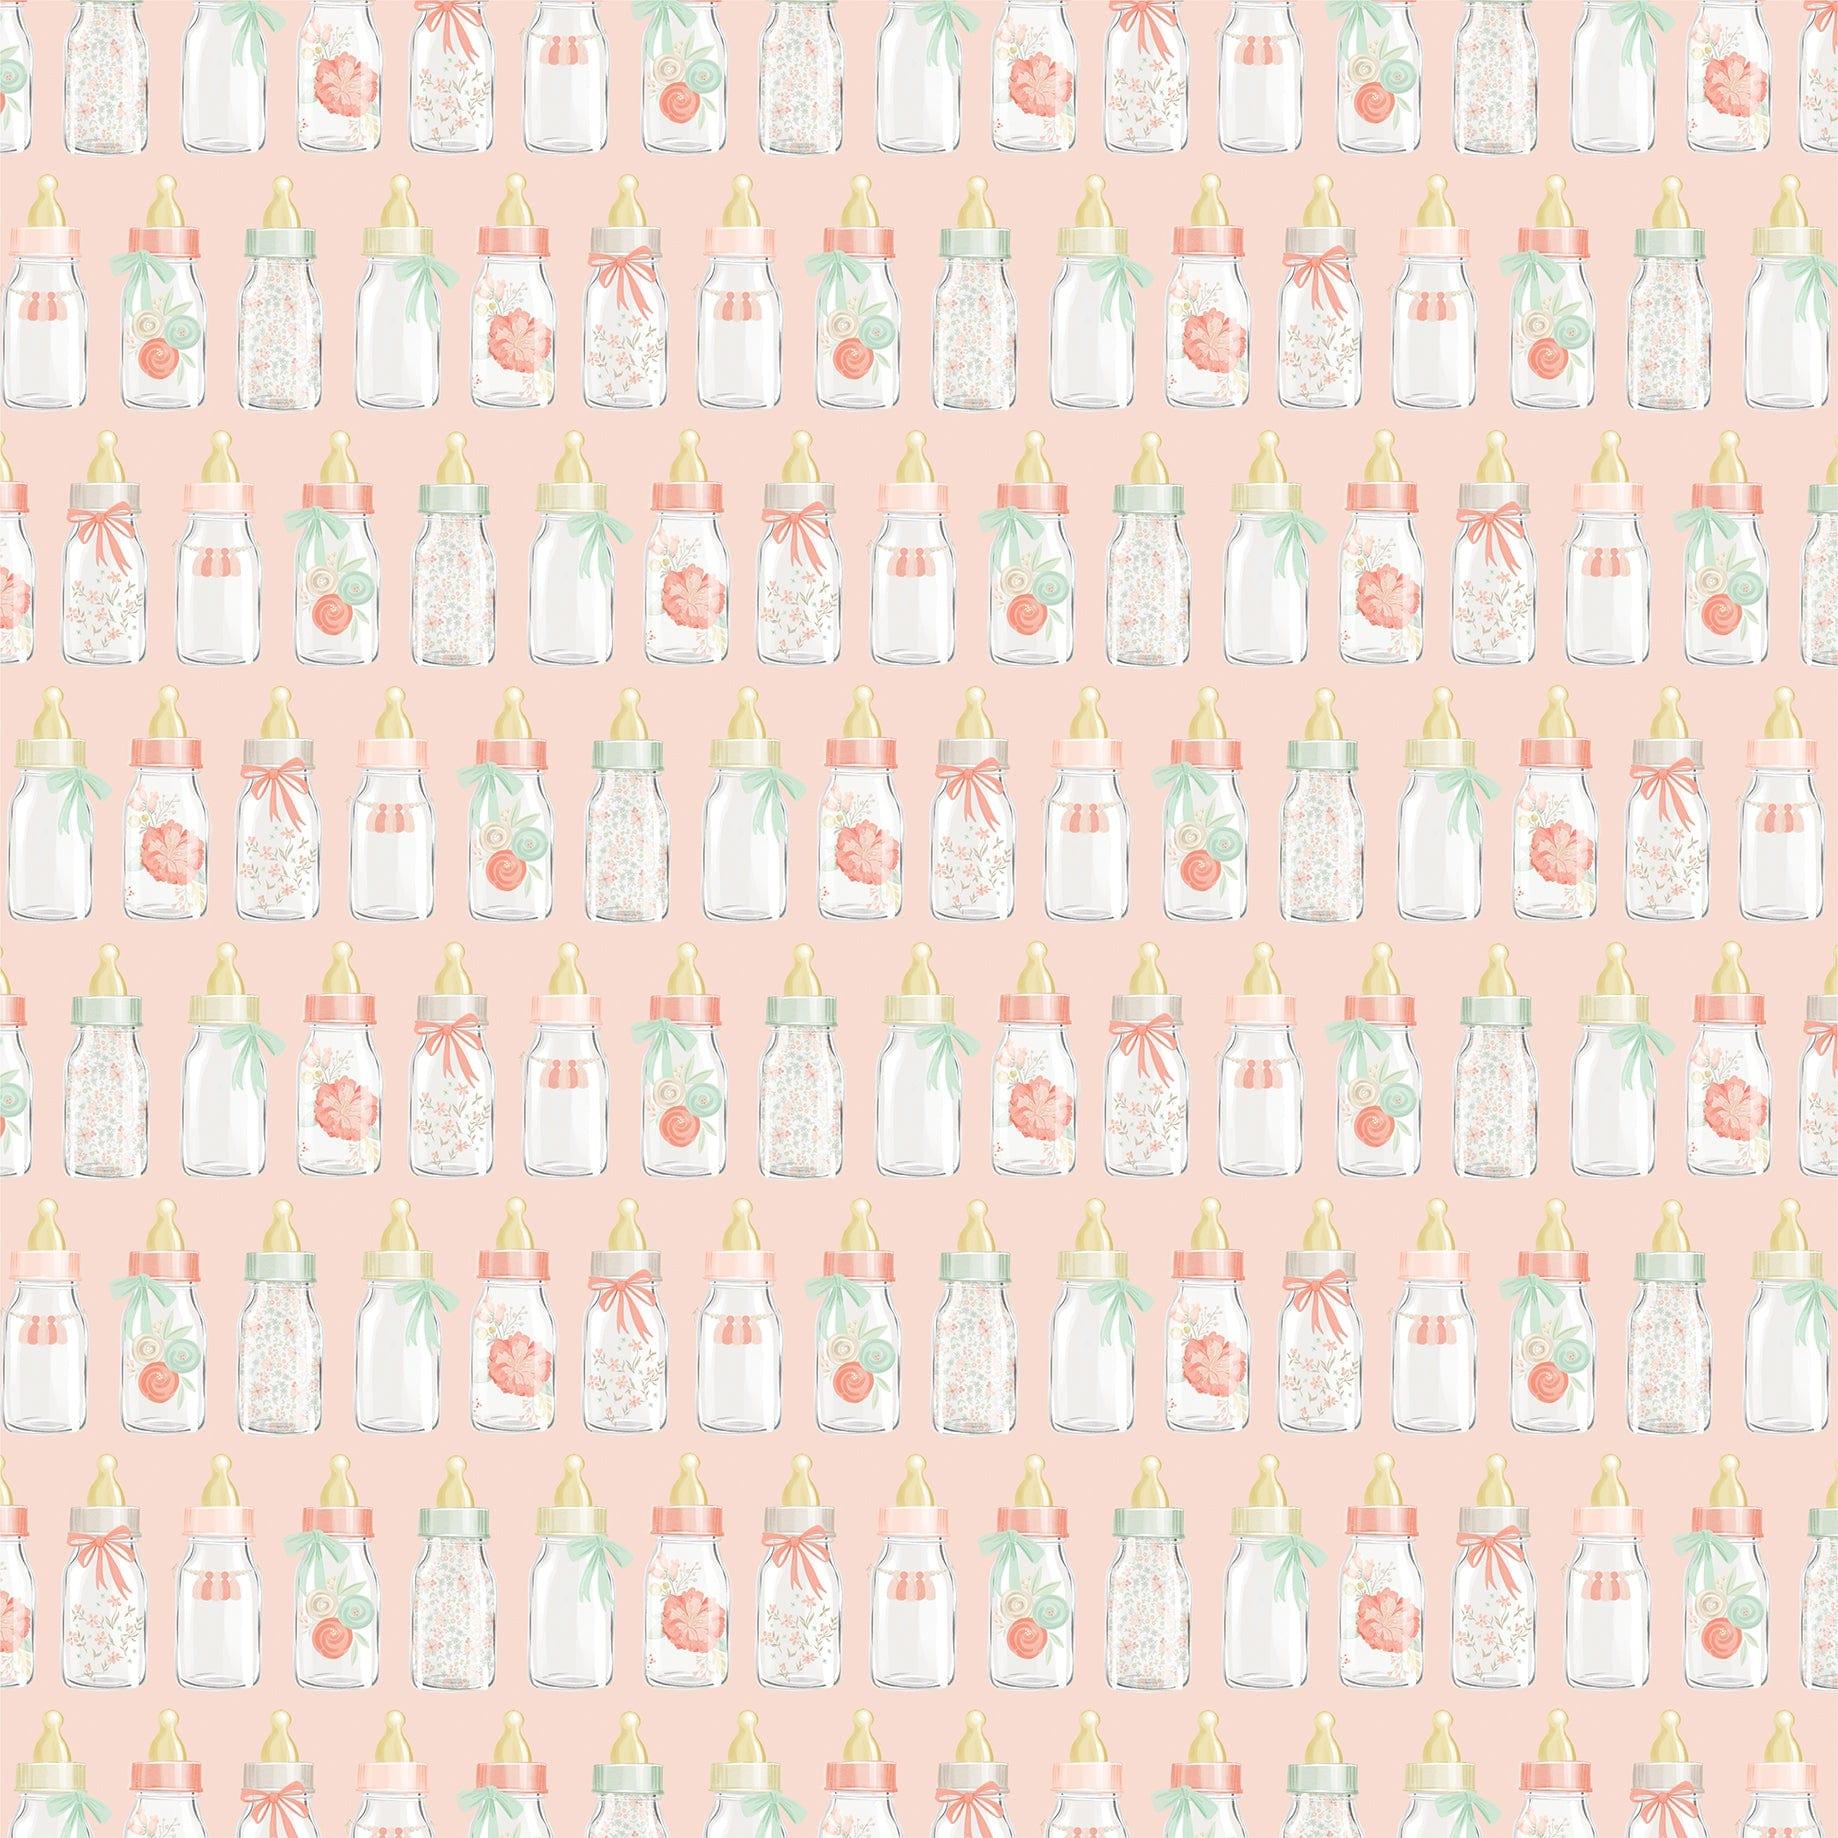 It's A Girl Collection Girl Baby Bottles 12 x 12 Double-Sided Scrapbook Paper by Echo Park Paper - Scrapbook Supply Companies